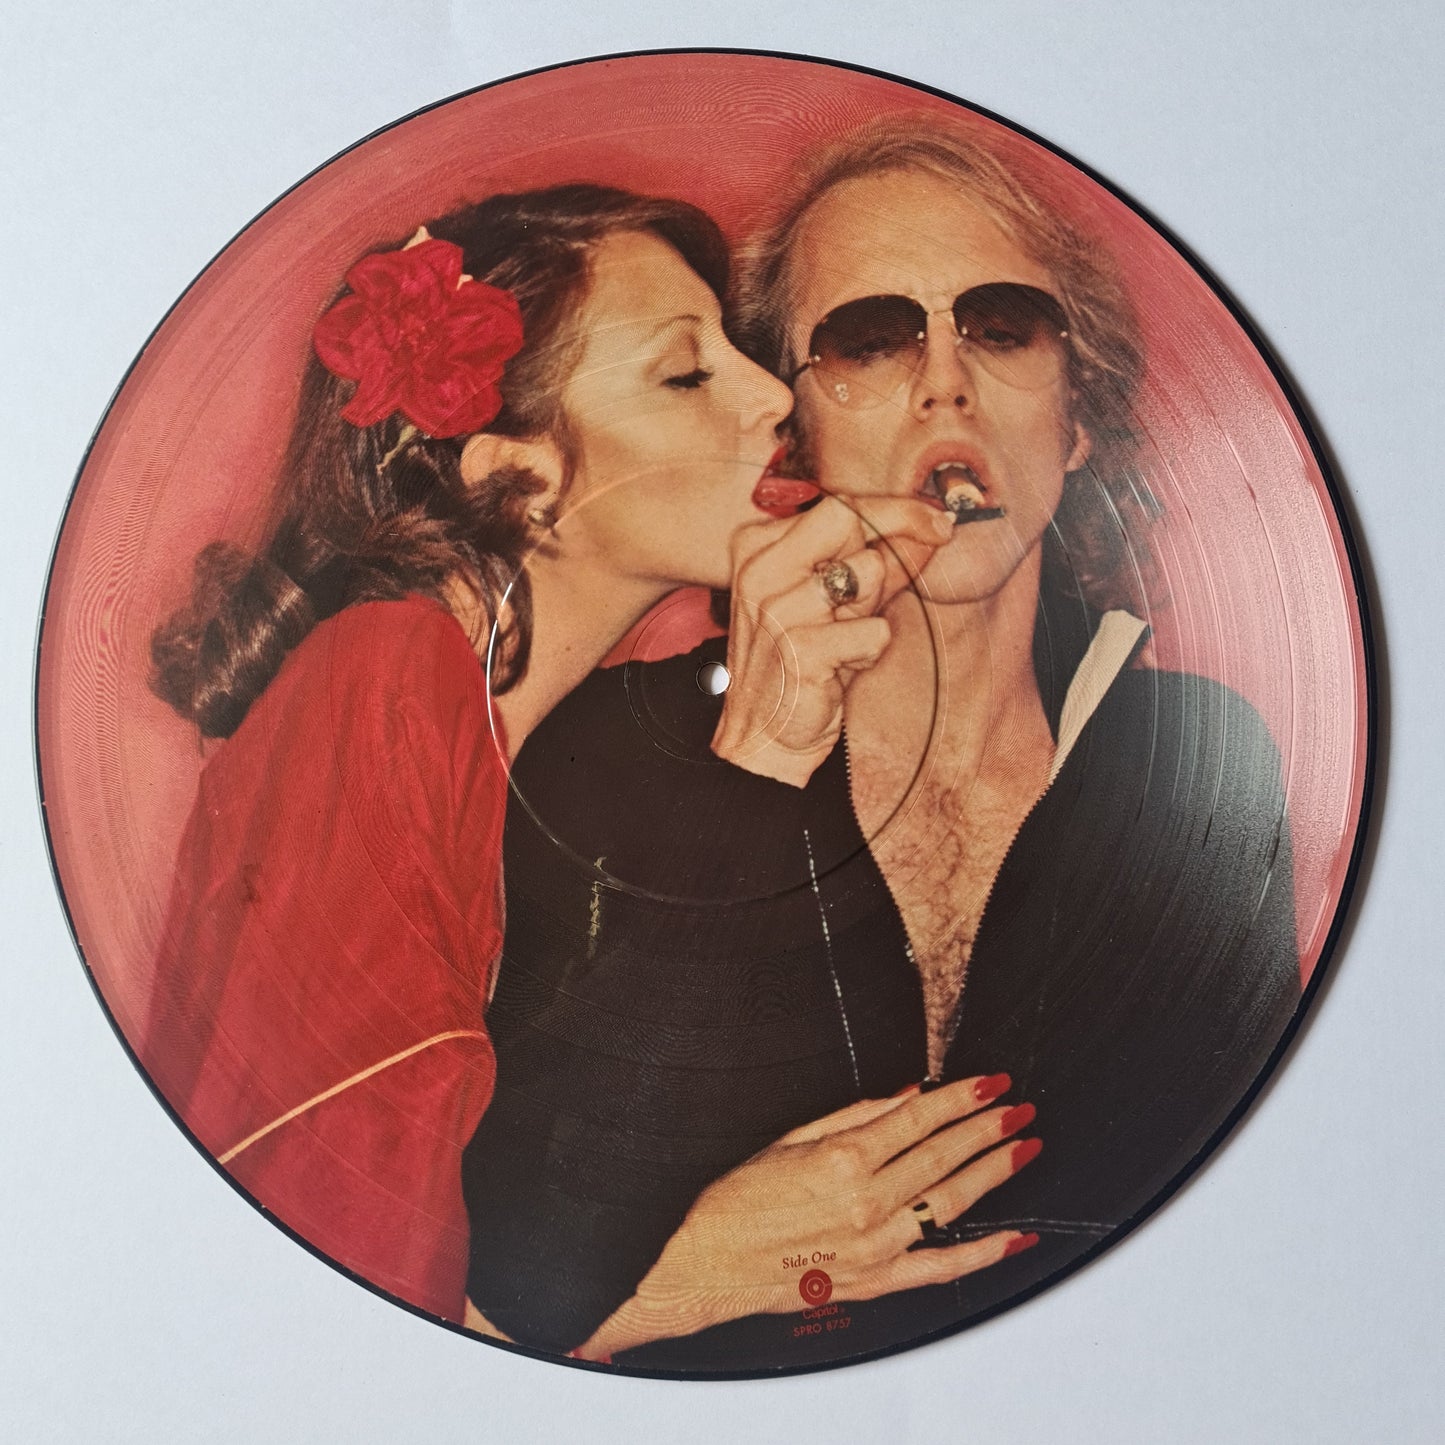 Bob Welch – French Kiss (Picture Disc) - 1977 - Vinyl Record